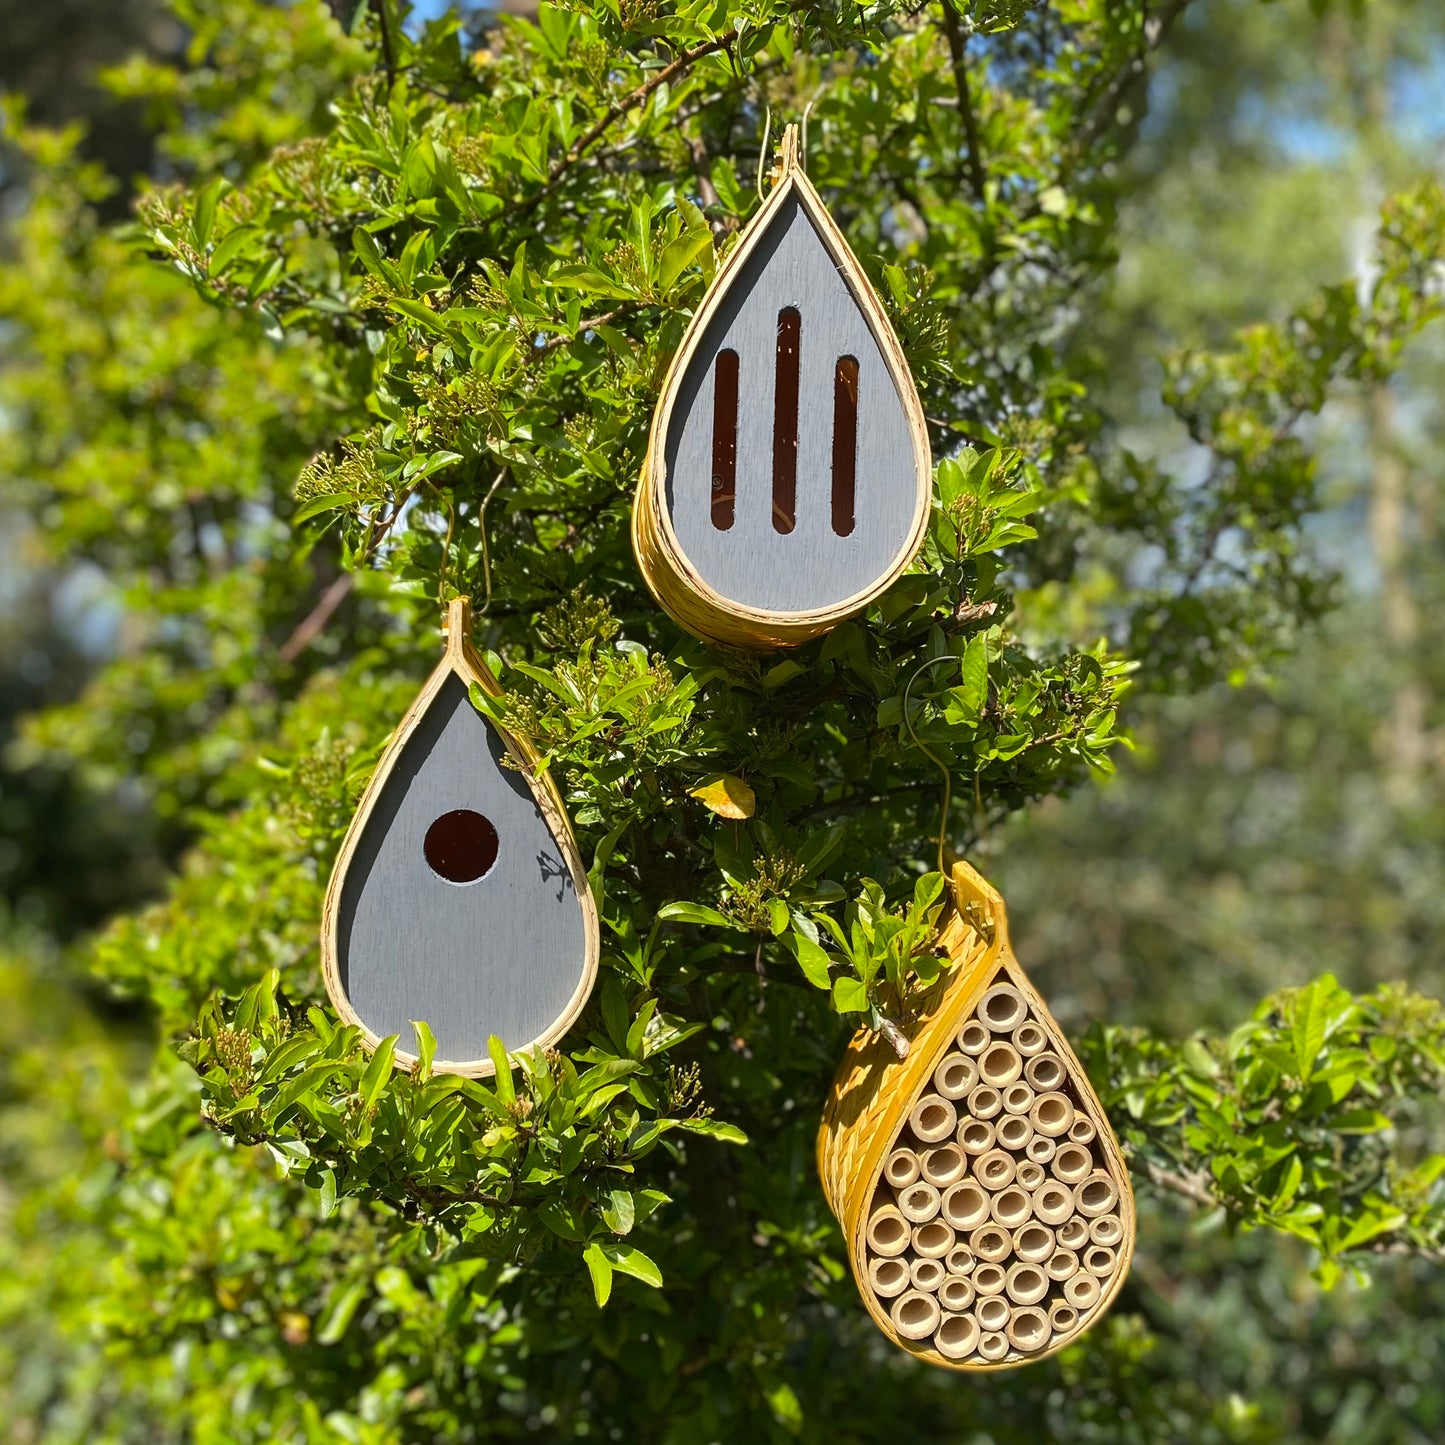 Hanging Teardrop Bird Nest Box, Insect Hotel & Butterfly House Wildlife Care Set